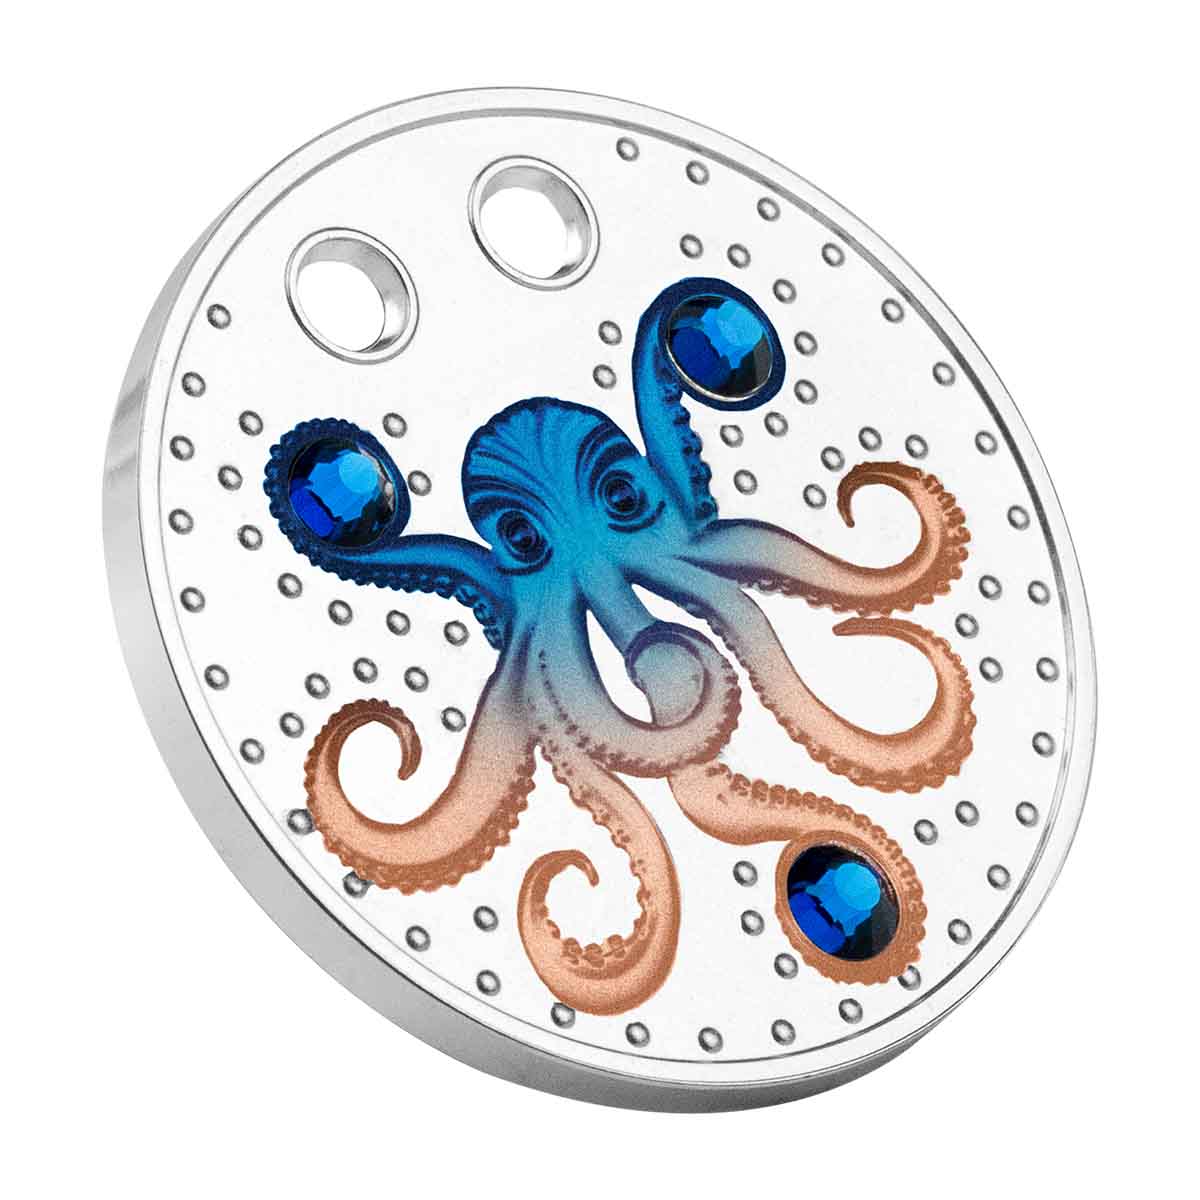 The Octopus 2022 500 Francs Coloured Silver Proof Coin Pendant